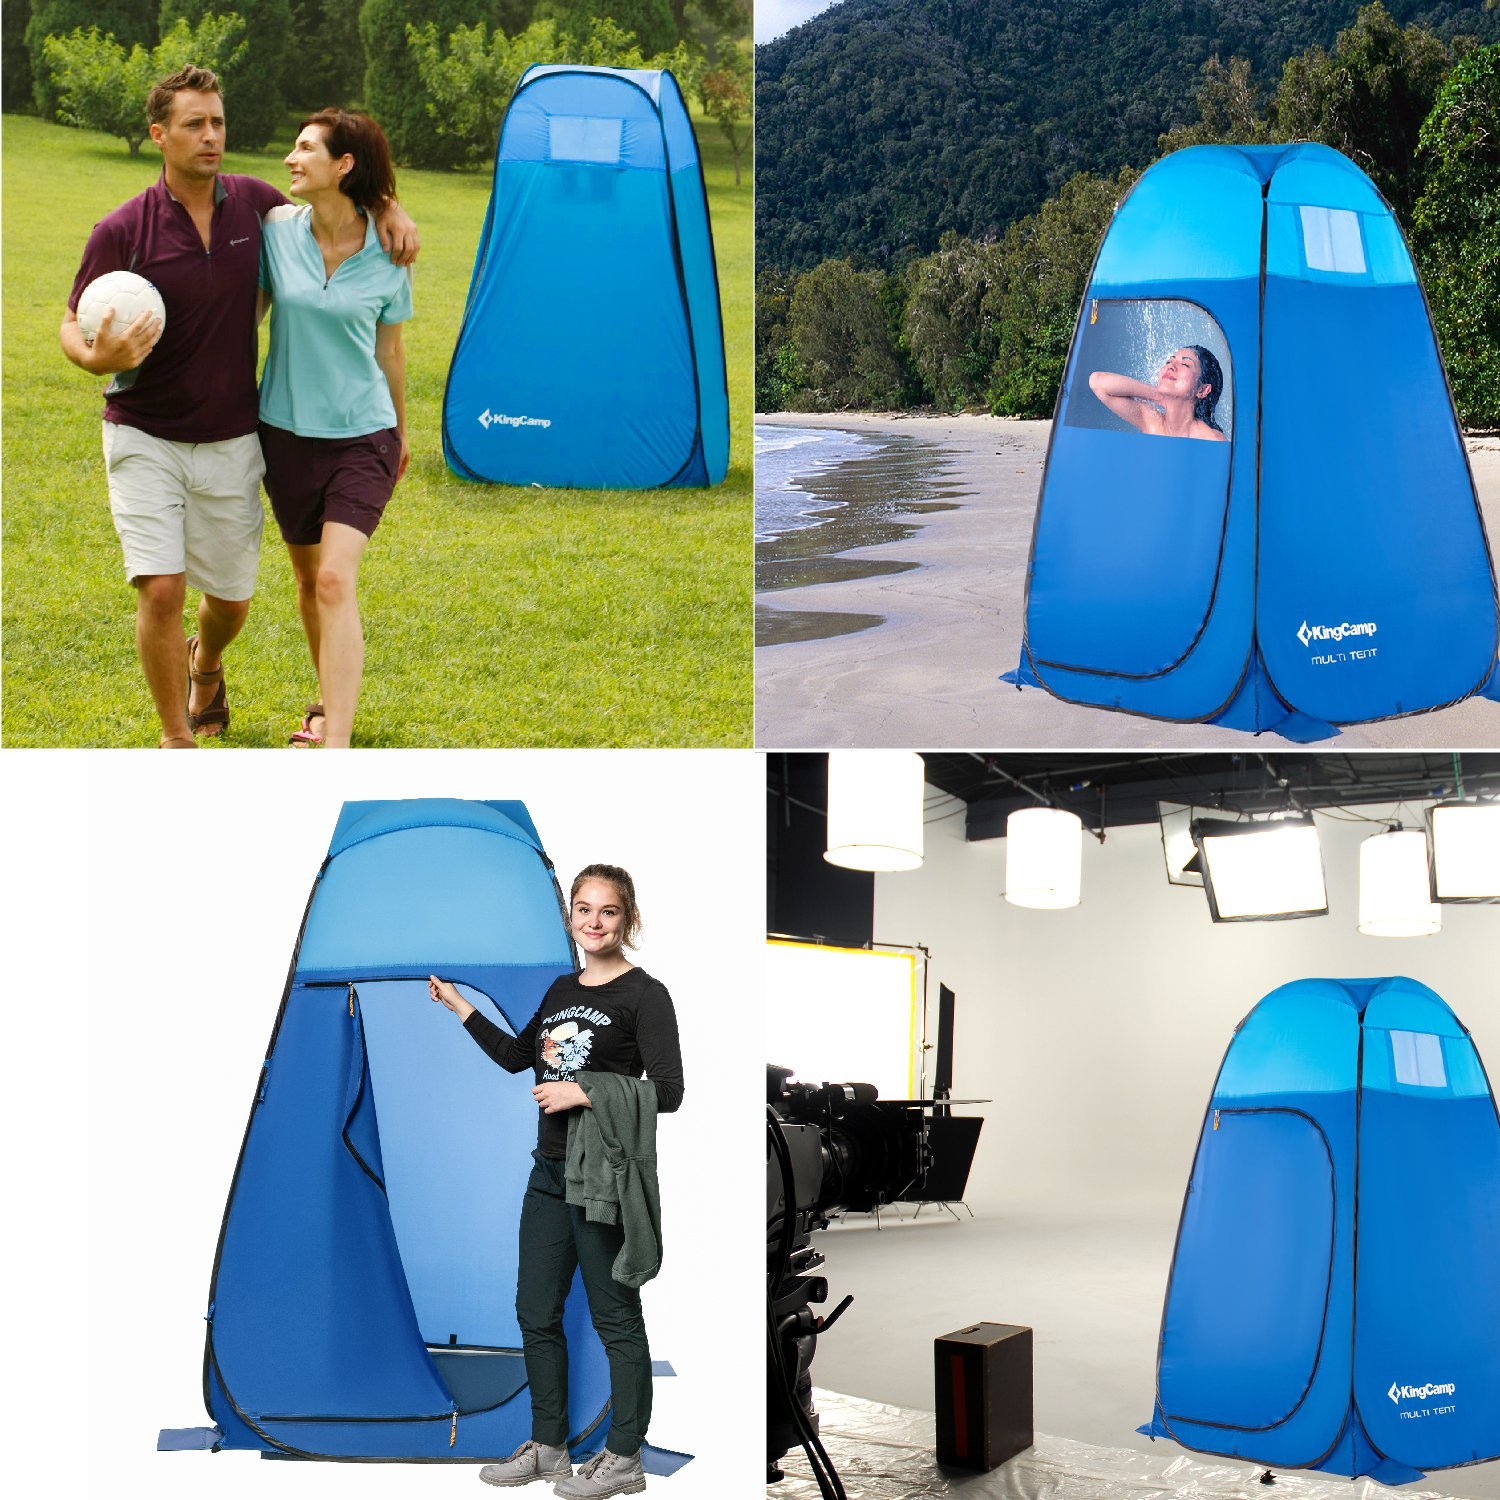 Dressing Changing Tent